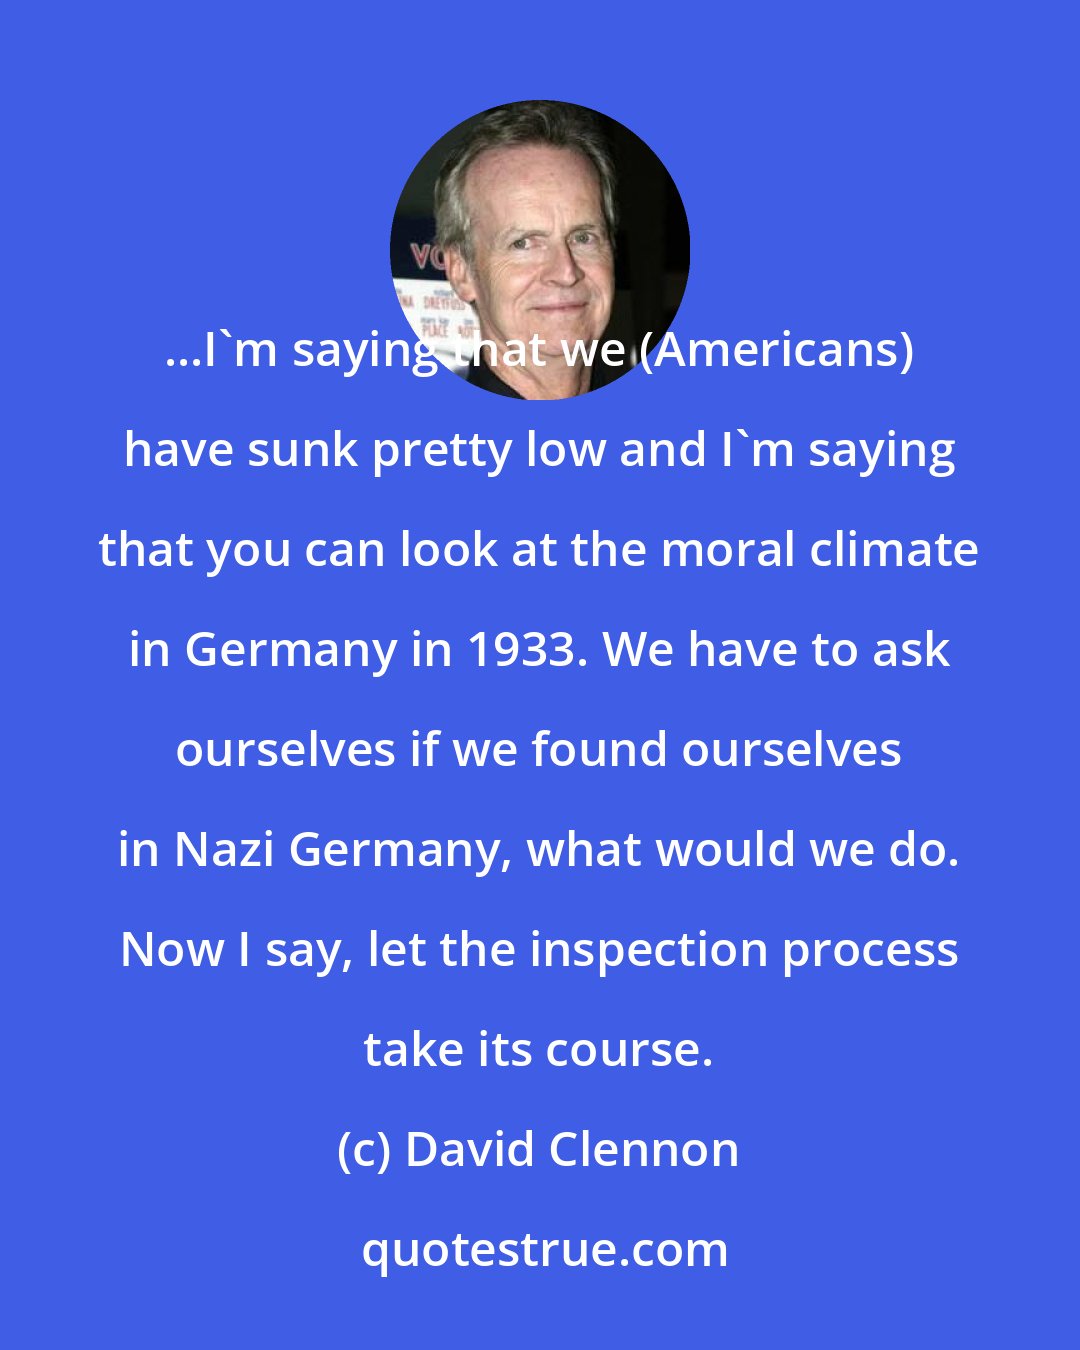 David Clennon: ...I'm saying that we (Americans) have sunk pretty low and I'm saying that you can look at the moral climate in Germany in 1933. We have to ask ourselves if we found ourselves in Nazi Germany, what would we do. Now I say, let the inspection process take its course.